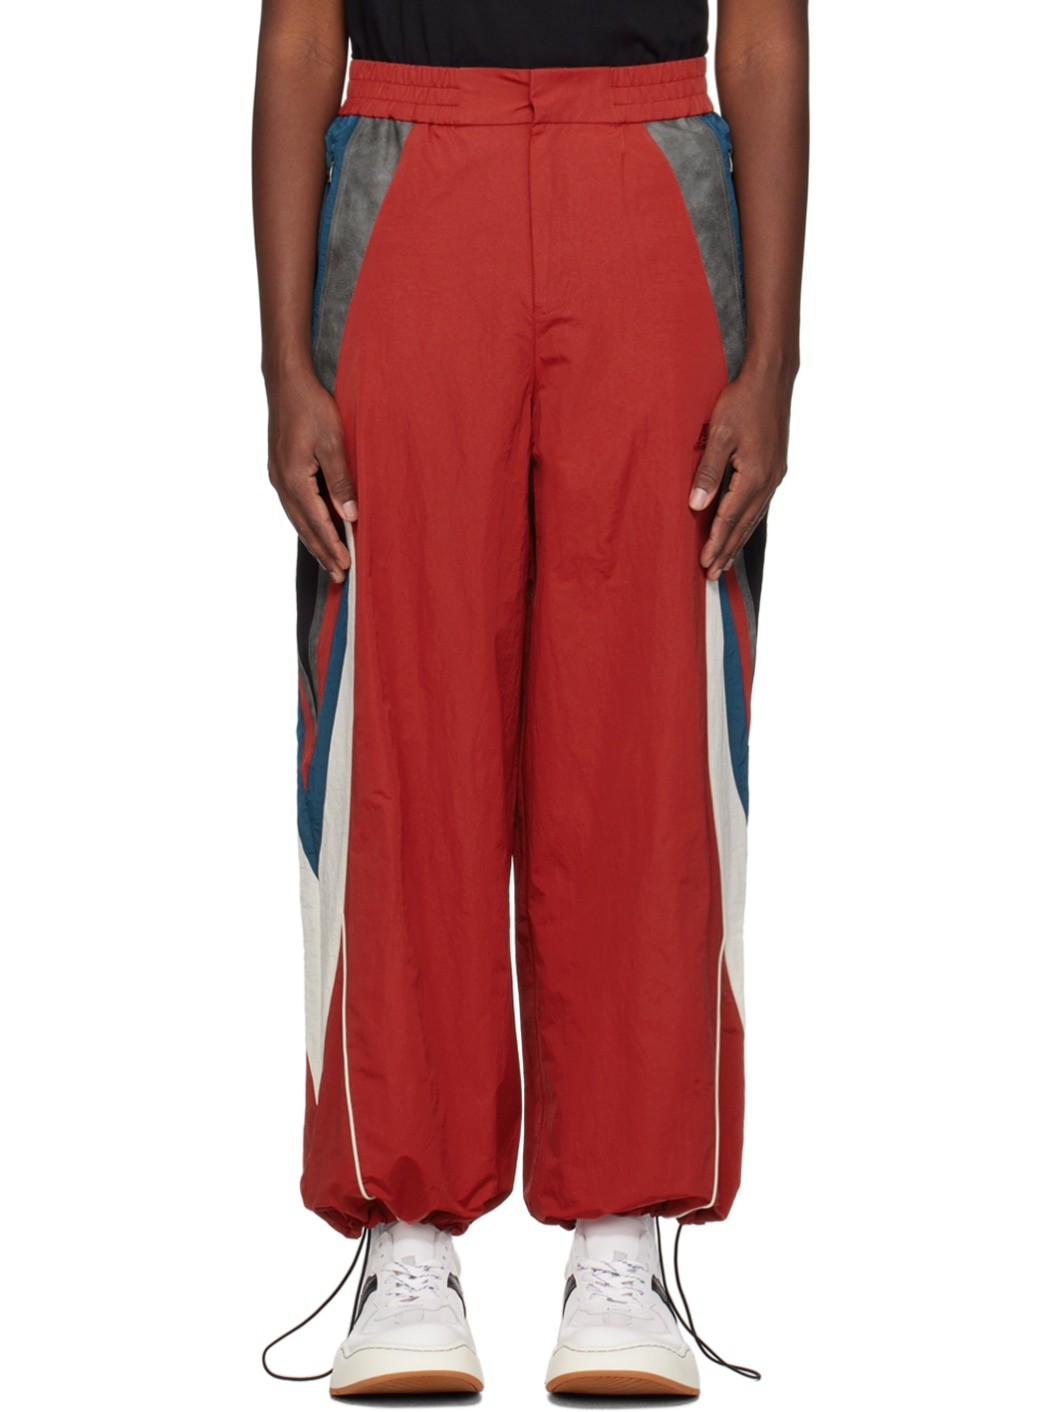 Red Paneled Track Pants - 1